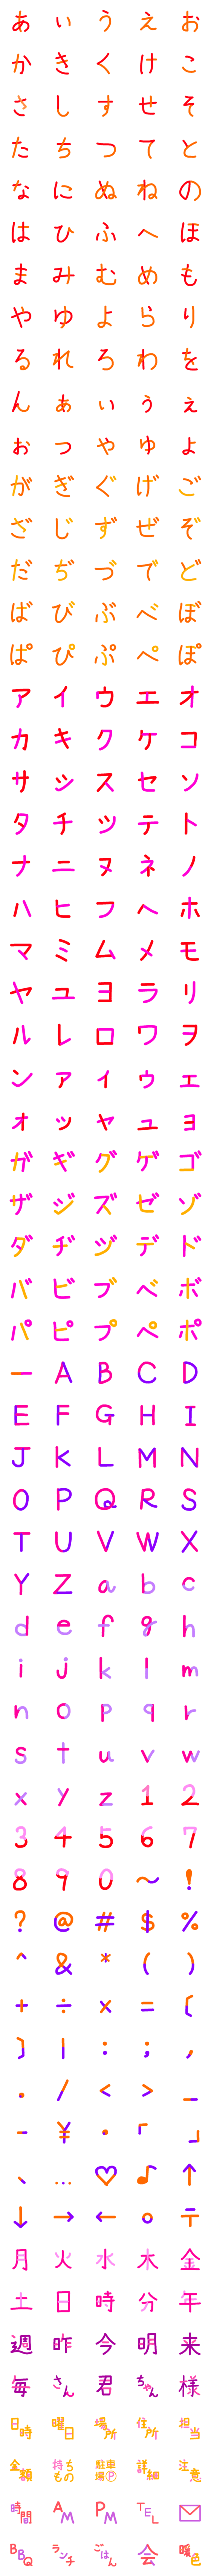 [LINE絵文字]暖色文字セットの画像一覧